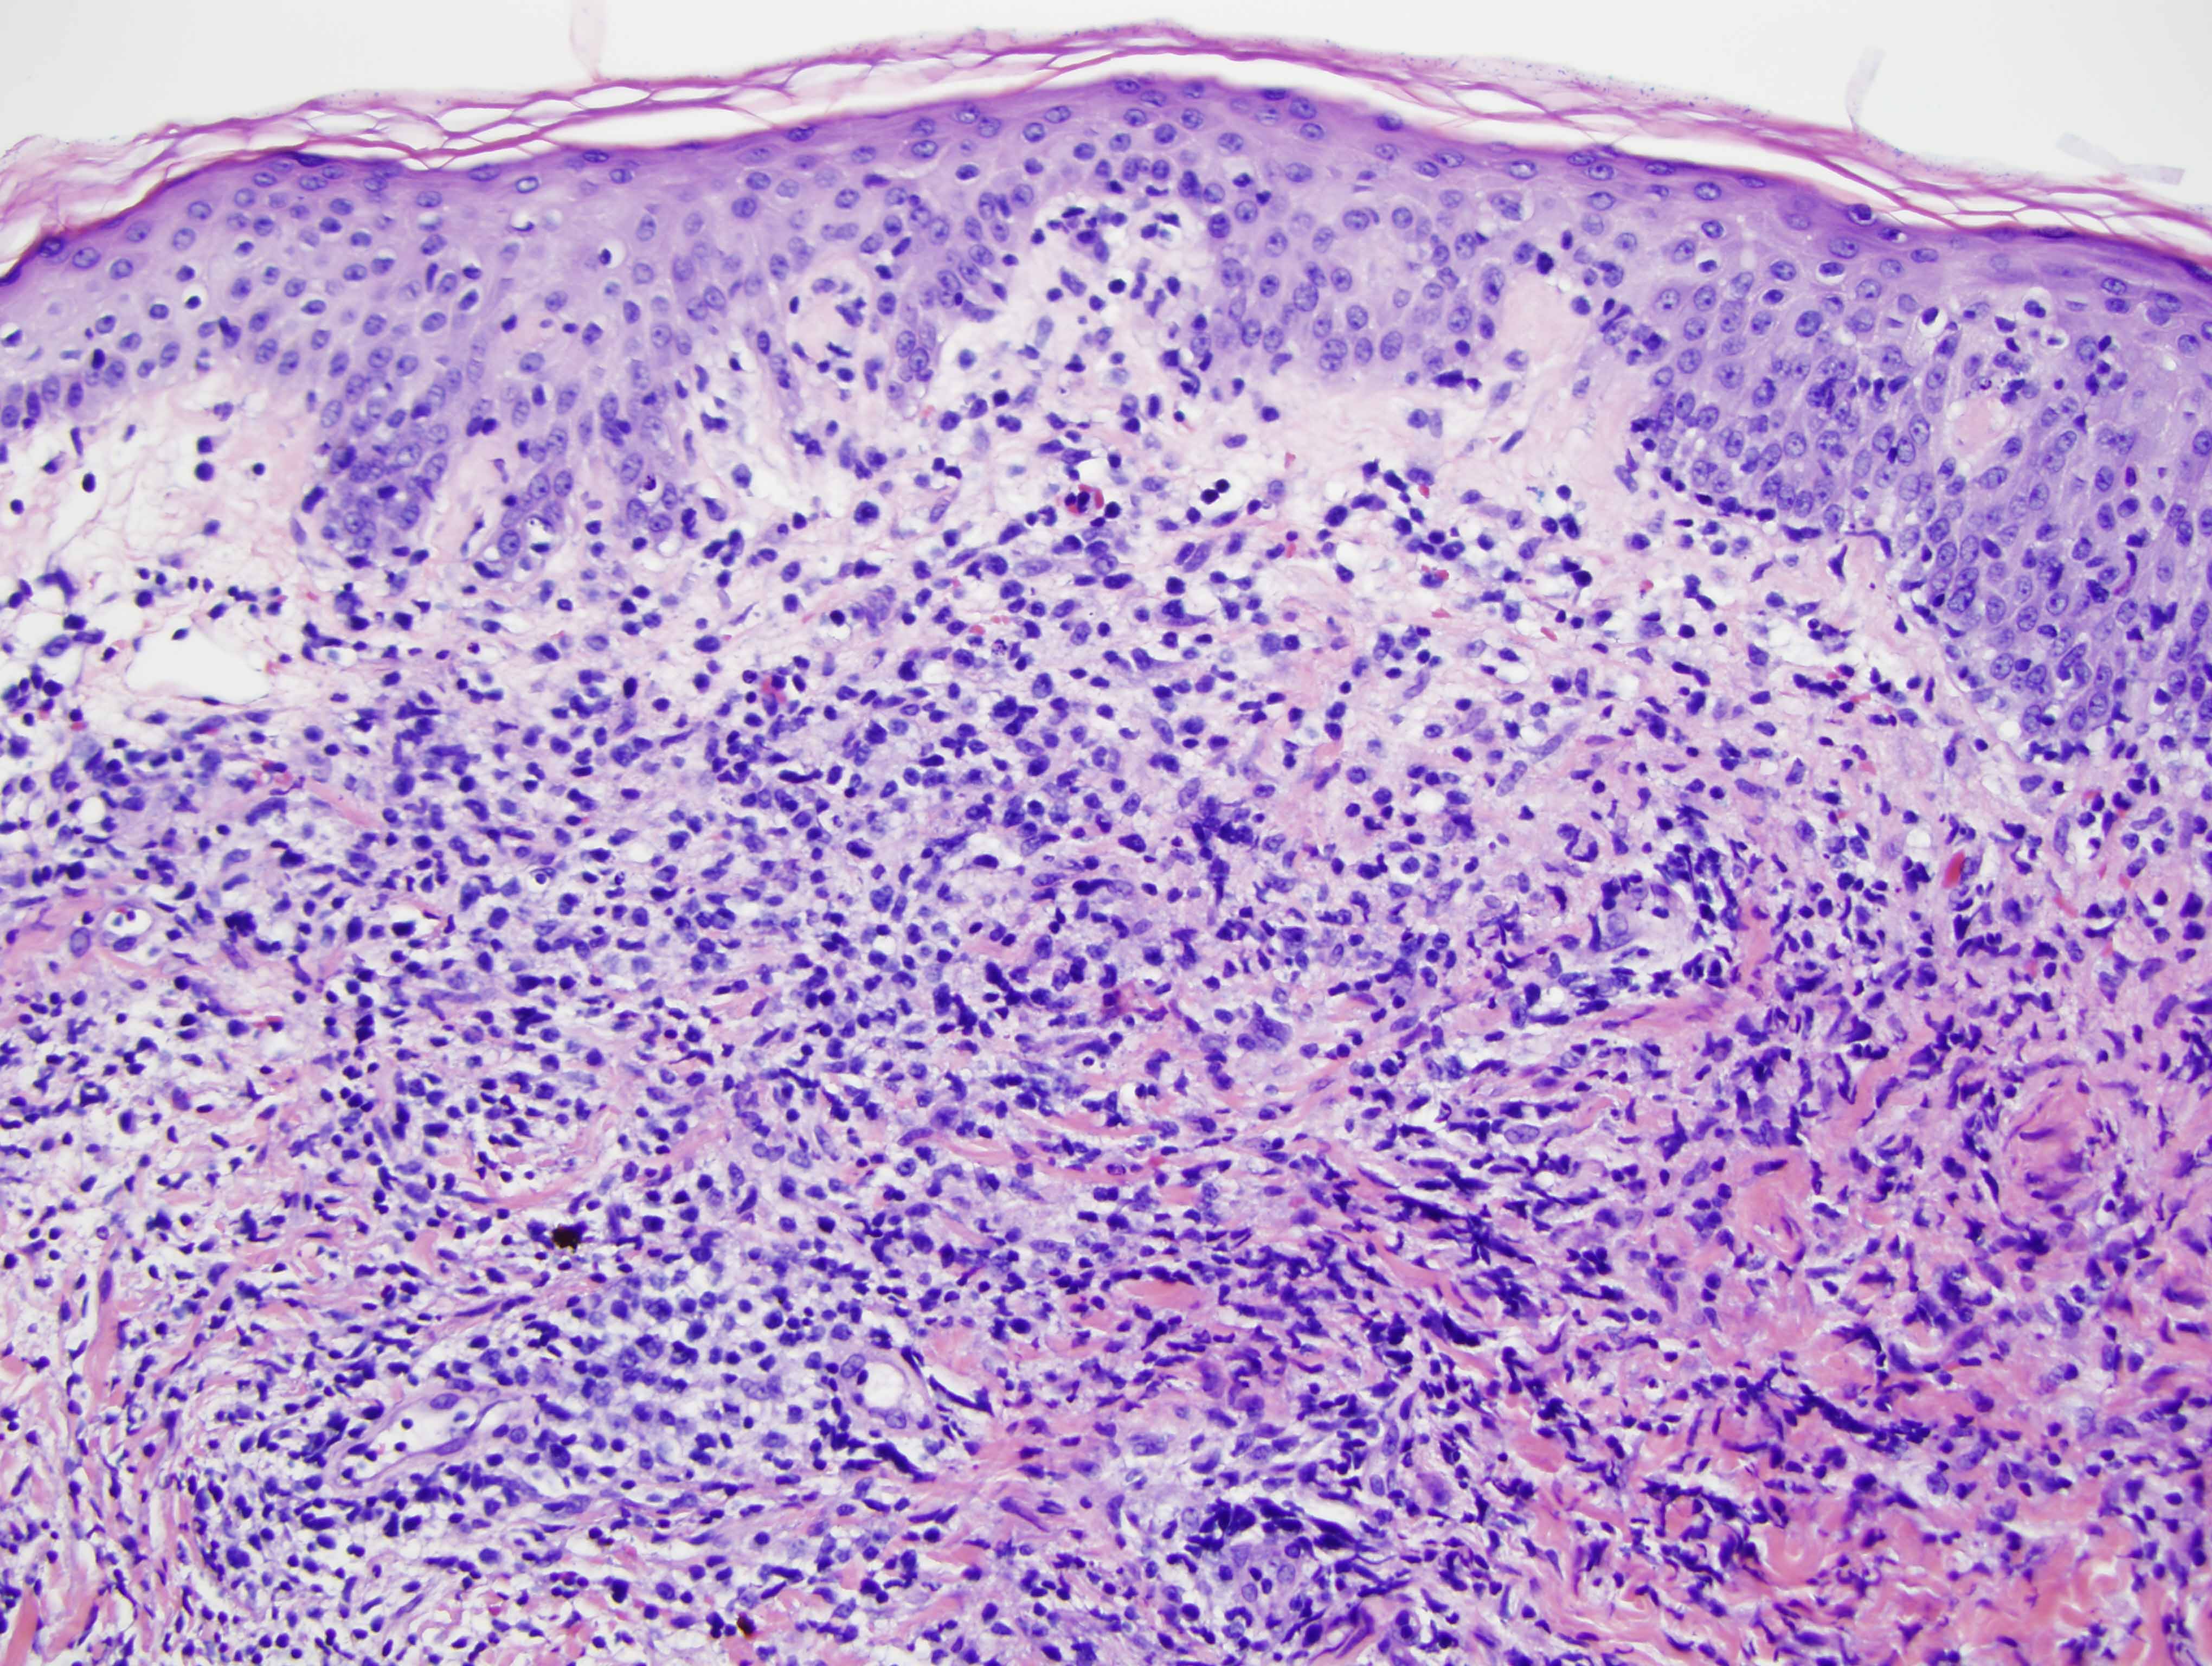 Slide 2: There is a component of interface change whereby lymphocytes are present along the dermal-epidermal junction with concomitant vacuous alteration of the basal layer keratinocytes with attendant epidermal attenuation alternating with zones of psoriasiform hyperplasia accompanied by slight hyperkeratosis.  The papillary dermis is somewhat edematous.  The lymphocytes that are permeative of the epidermis to define this vacuous interface process are small to intermediate in size showing rounded to somewhat angulated nuclear contours with nuclear hyperchromasia.